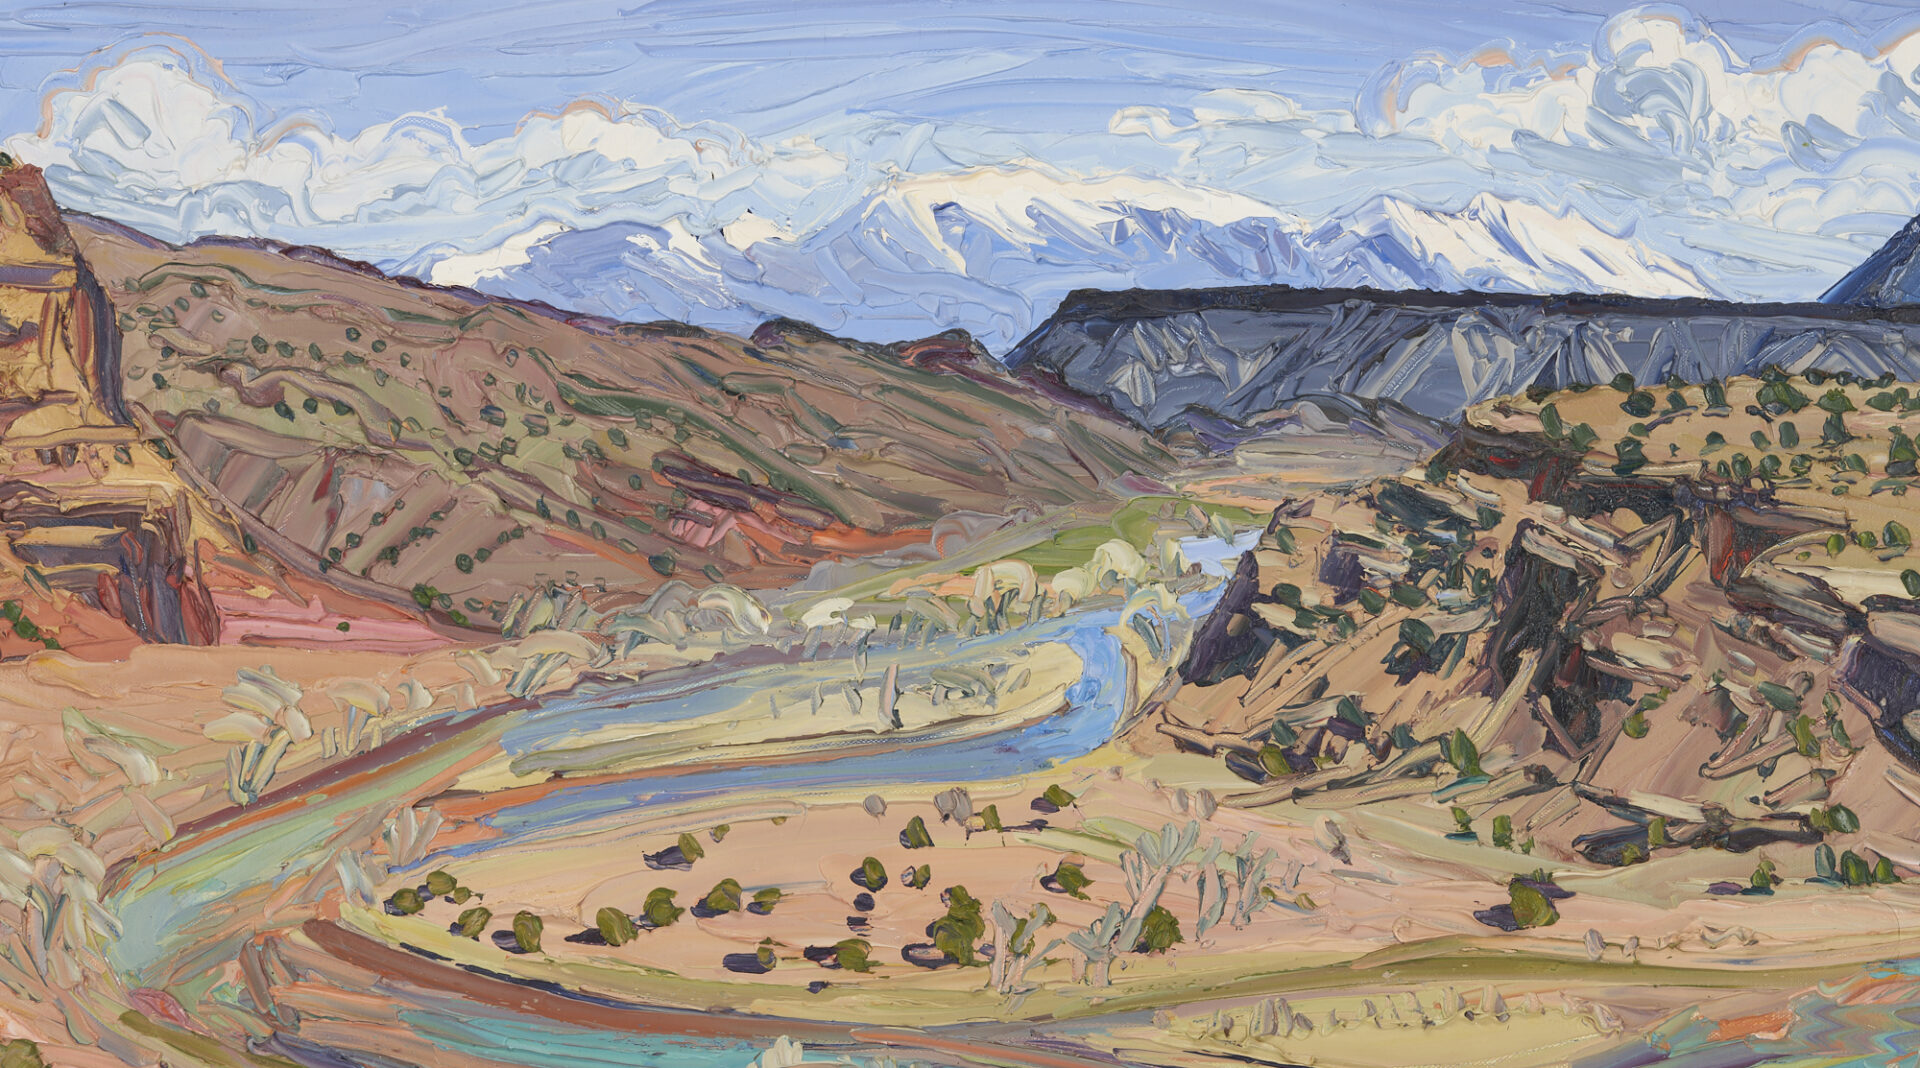 Lot 509: Louisa McElwain O/C New Mexico Landscape, The Chama Valley, Abiquiu